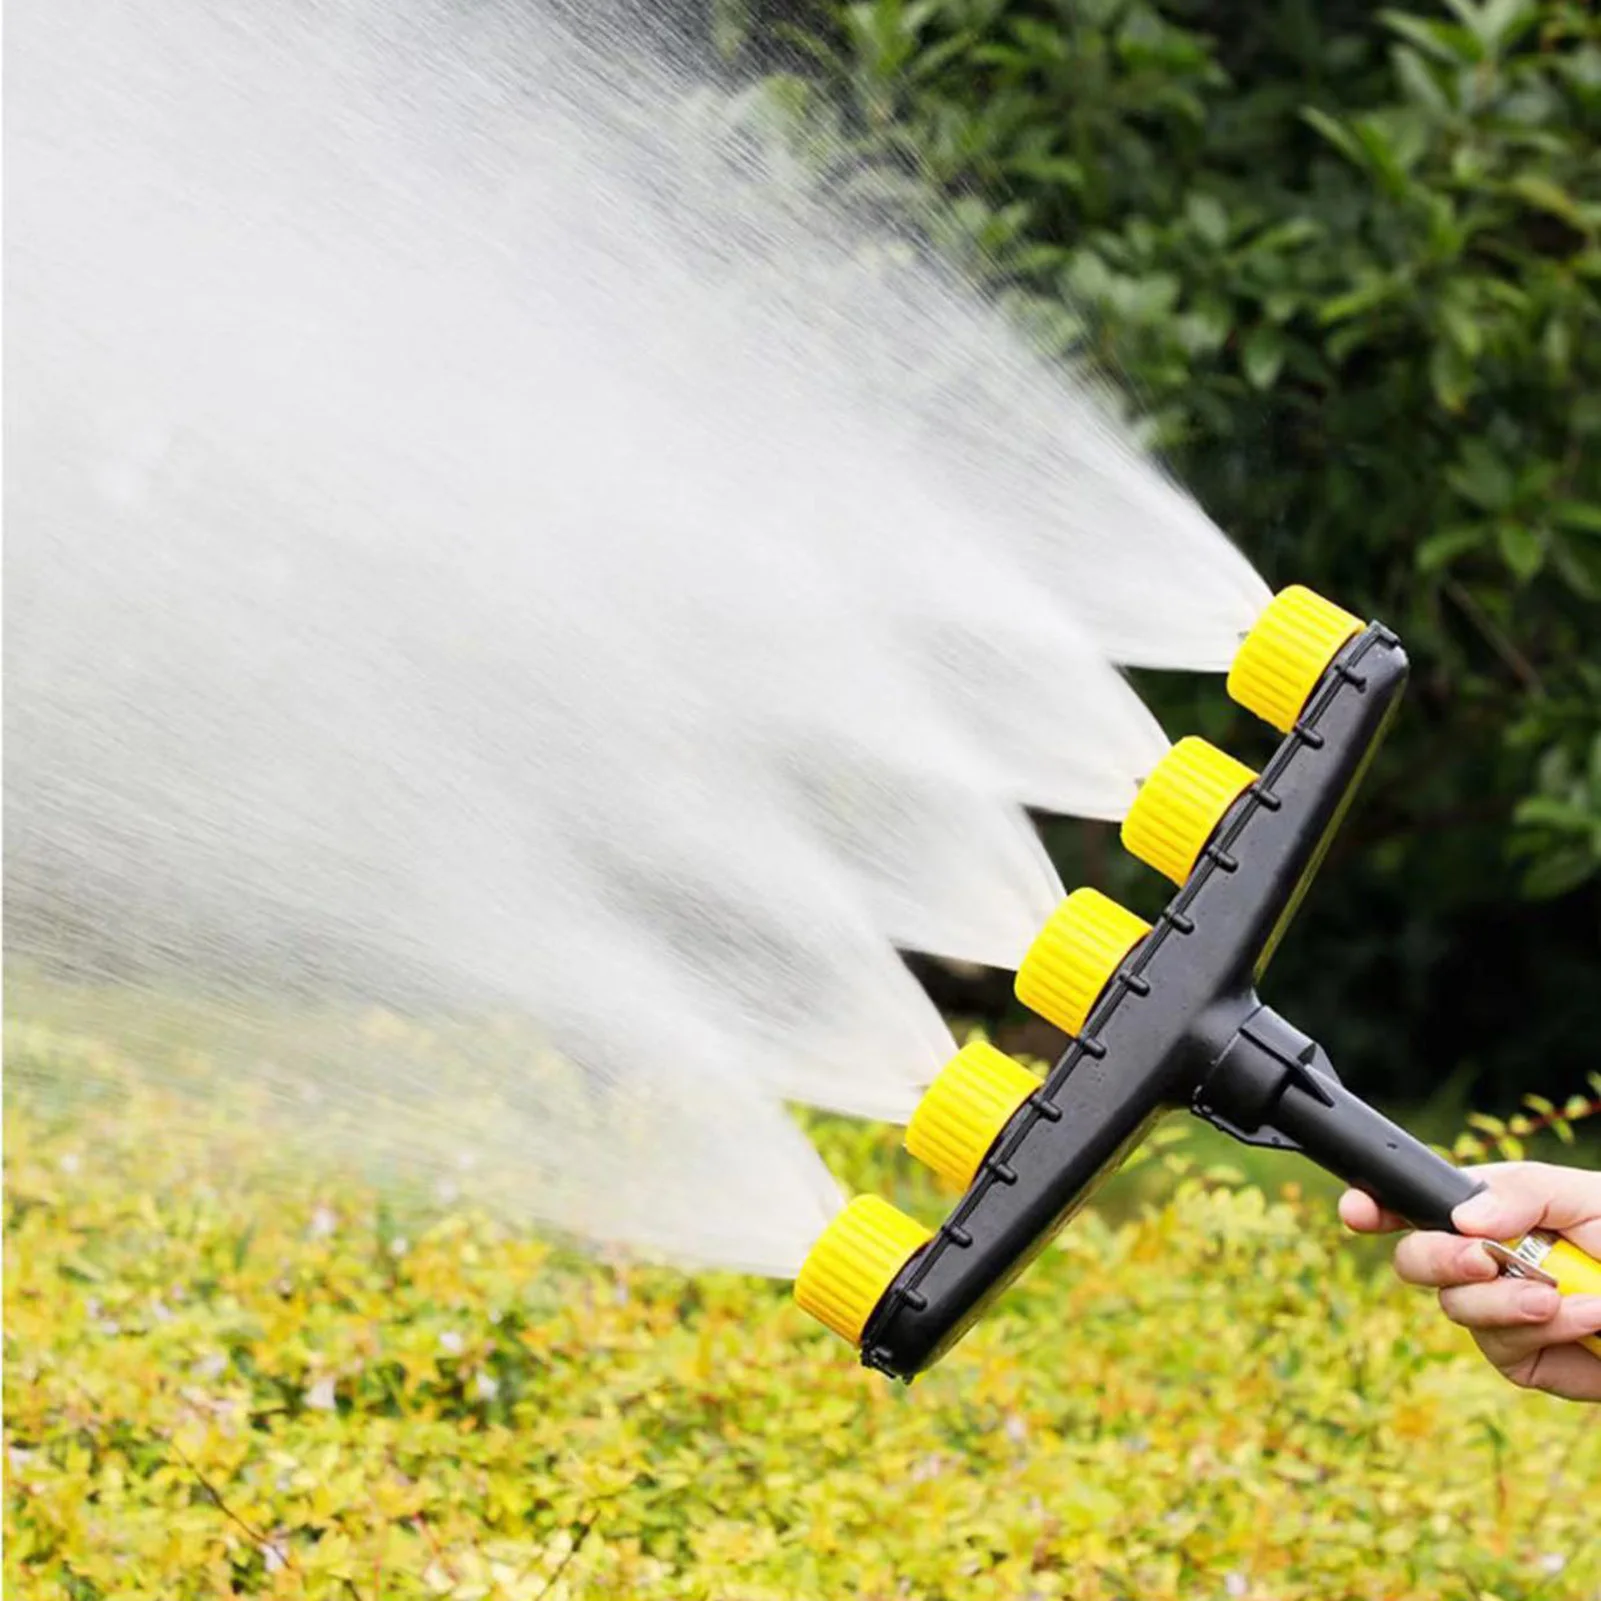 Sprayer Nozzle Multi-head Spraying Hose Attachment Sprayer For Lawns And Gardens Yards Imnt